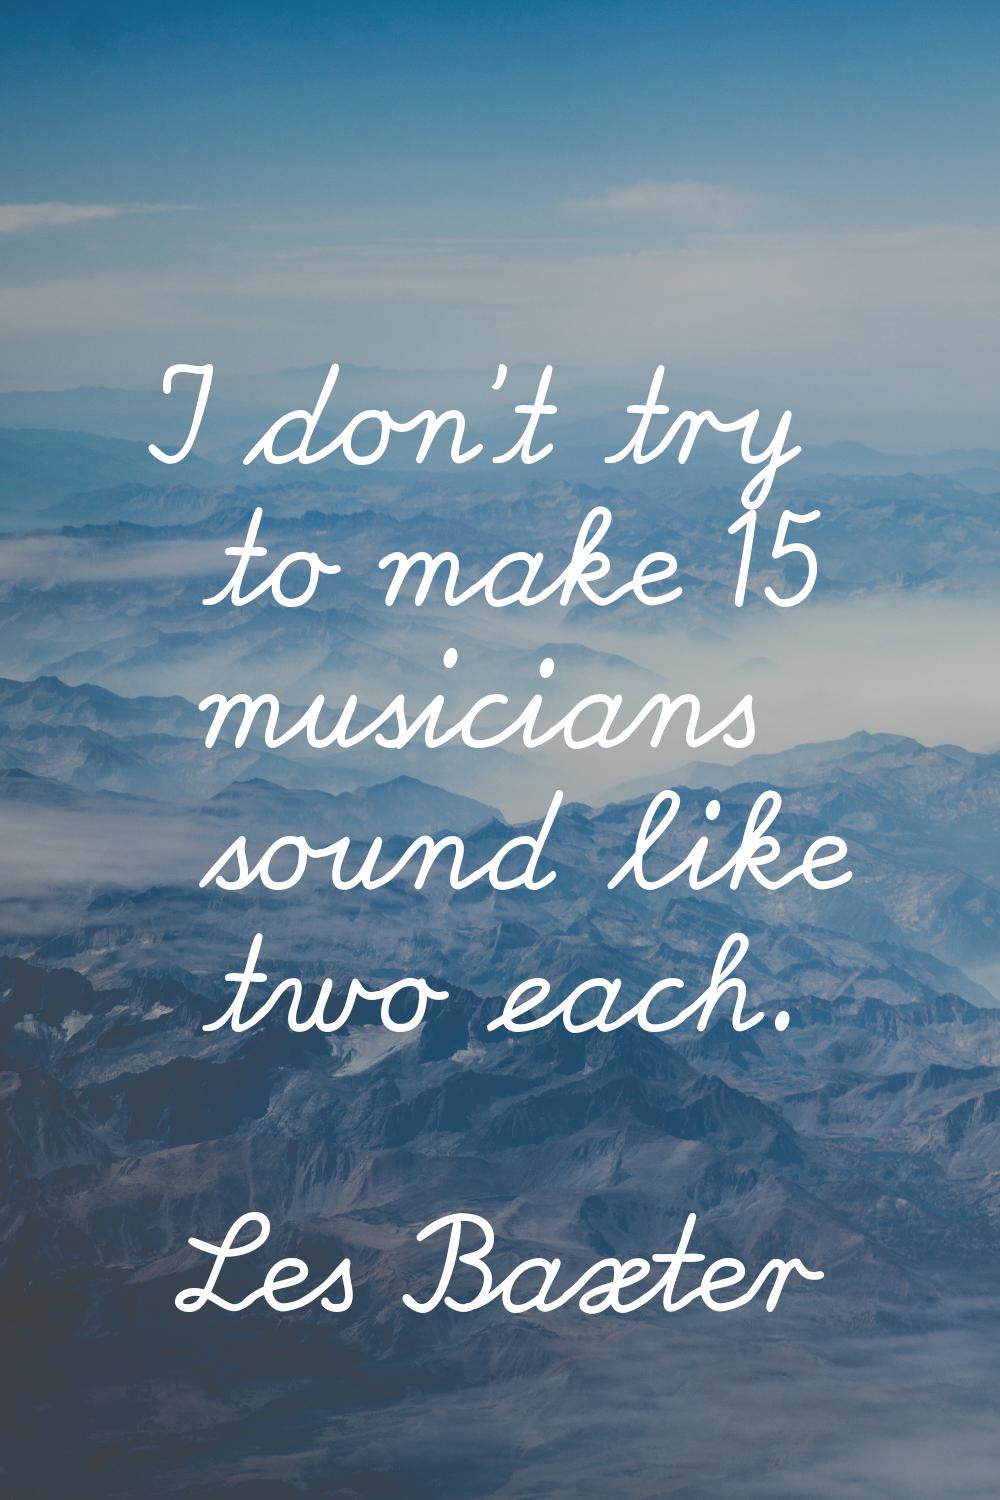 I don't try to make 15 musicians sound like two each.